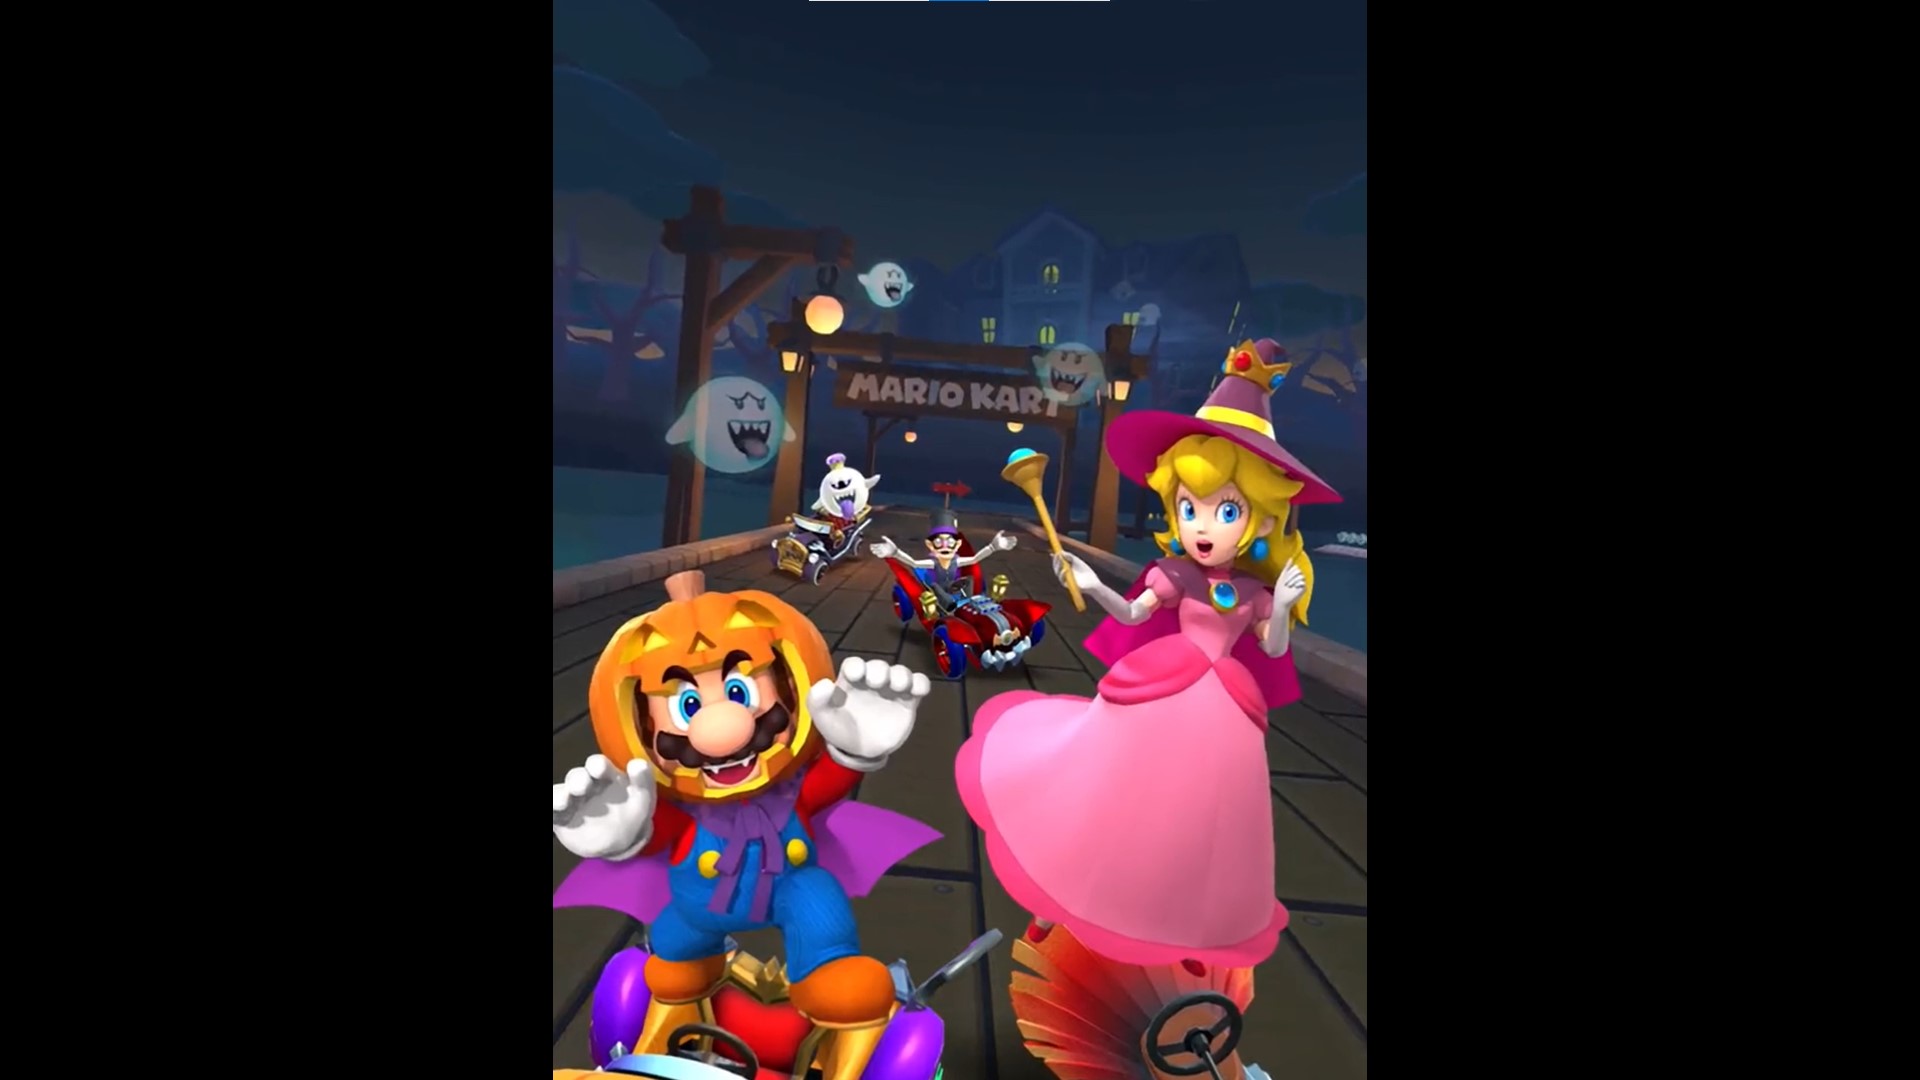 Mario Kart Tour fans share the love for Boo Lake